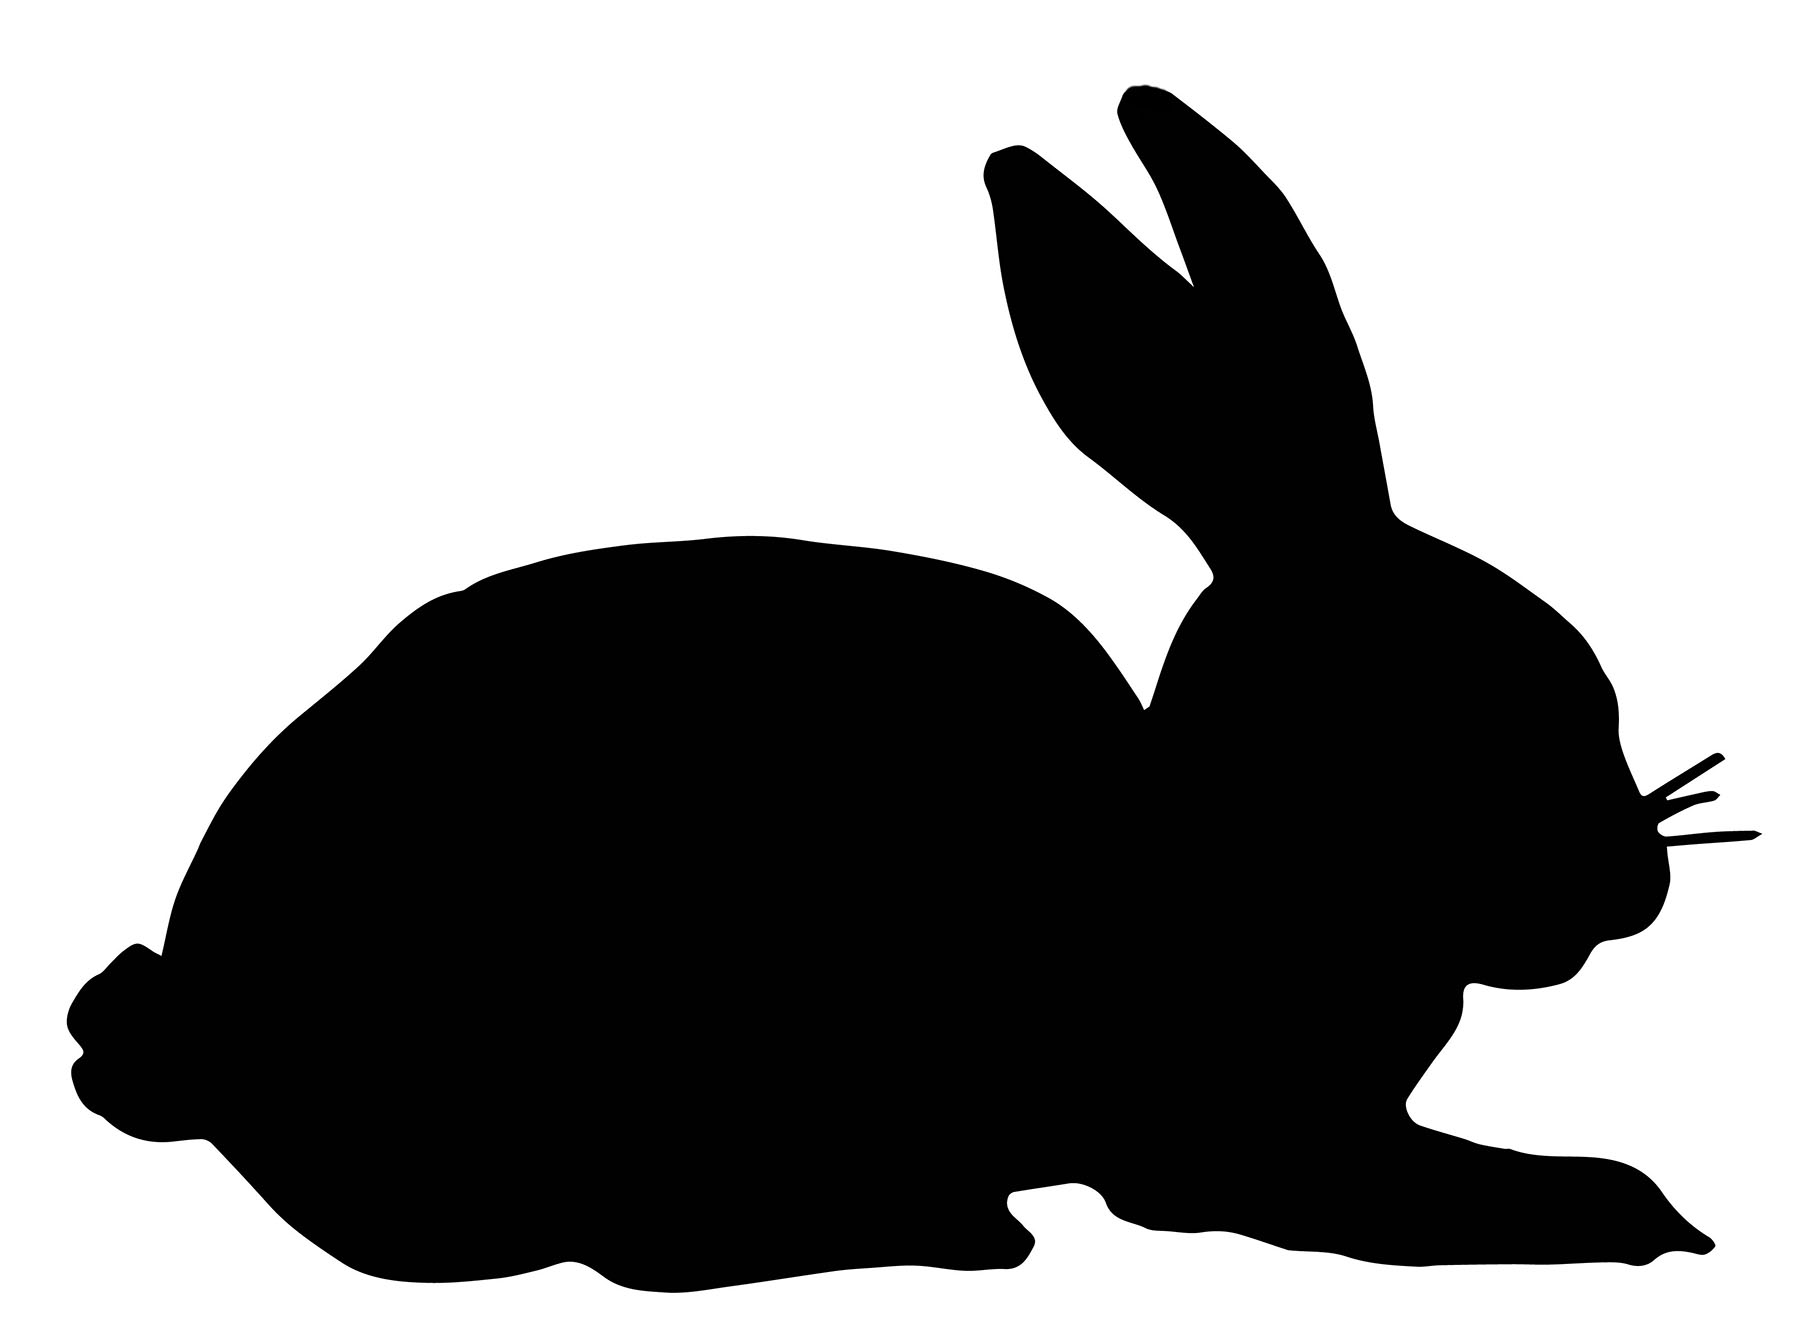 Get Crafty with Free Printable Bunny Silhouette: Create Adorable Easter